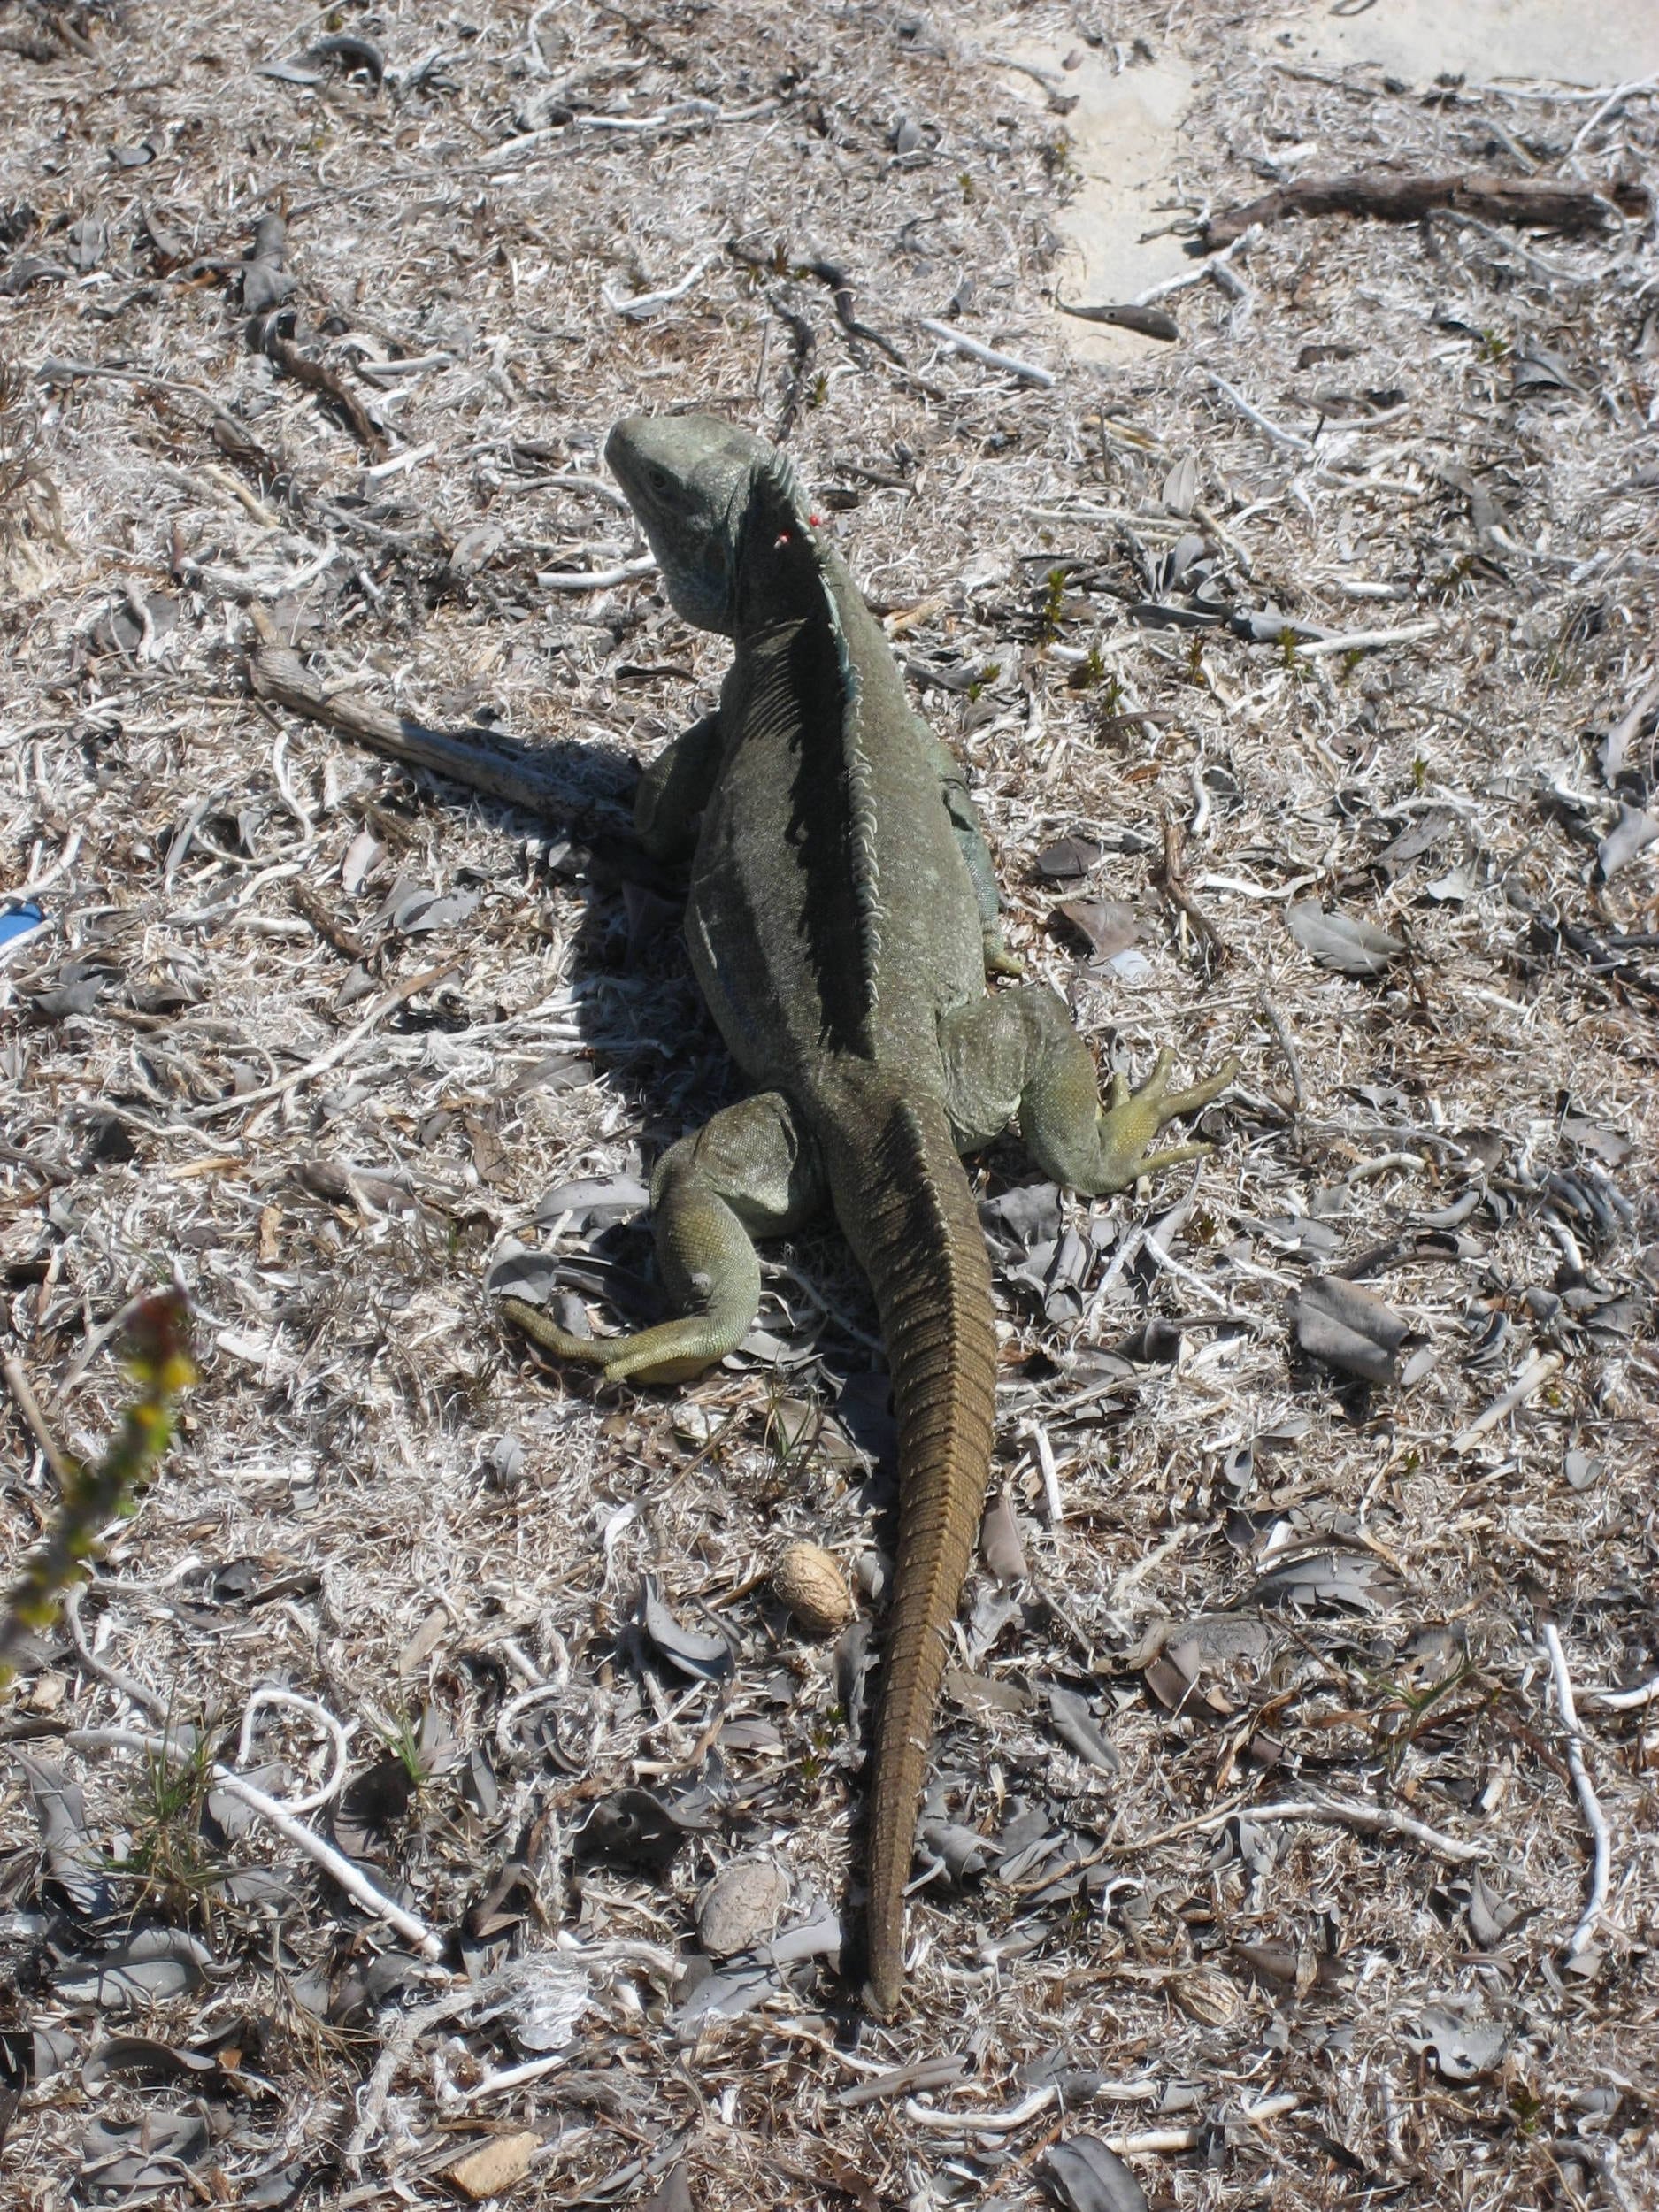 Iguanas are the only inhabitants on Little Way Cay